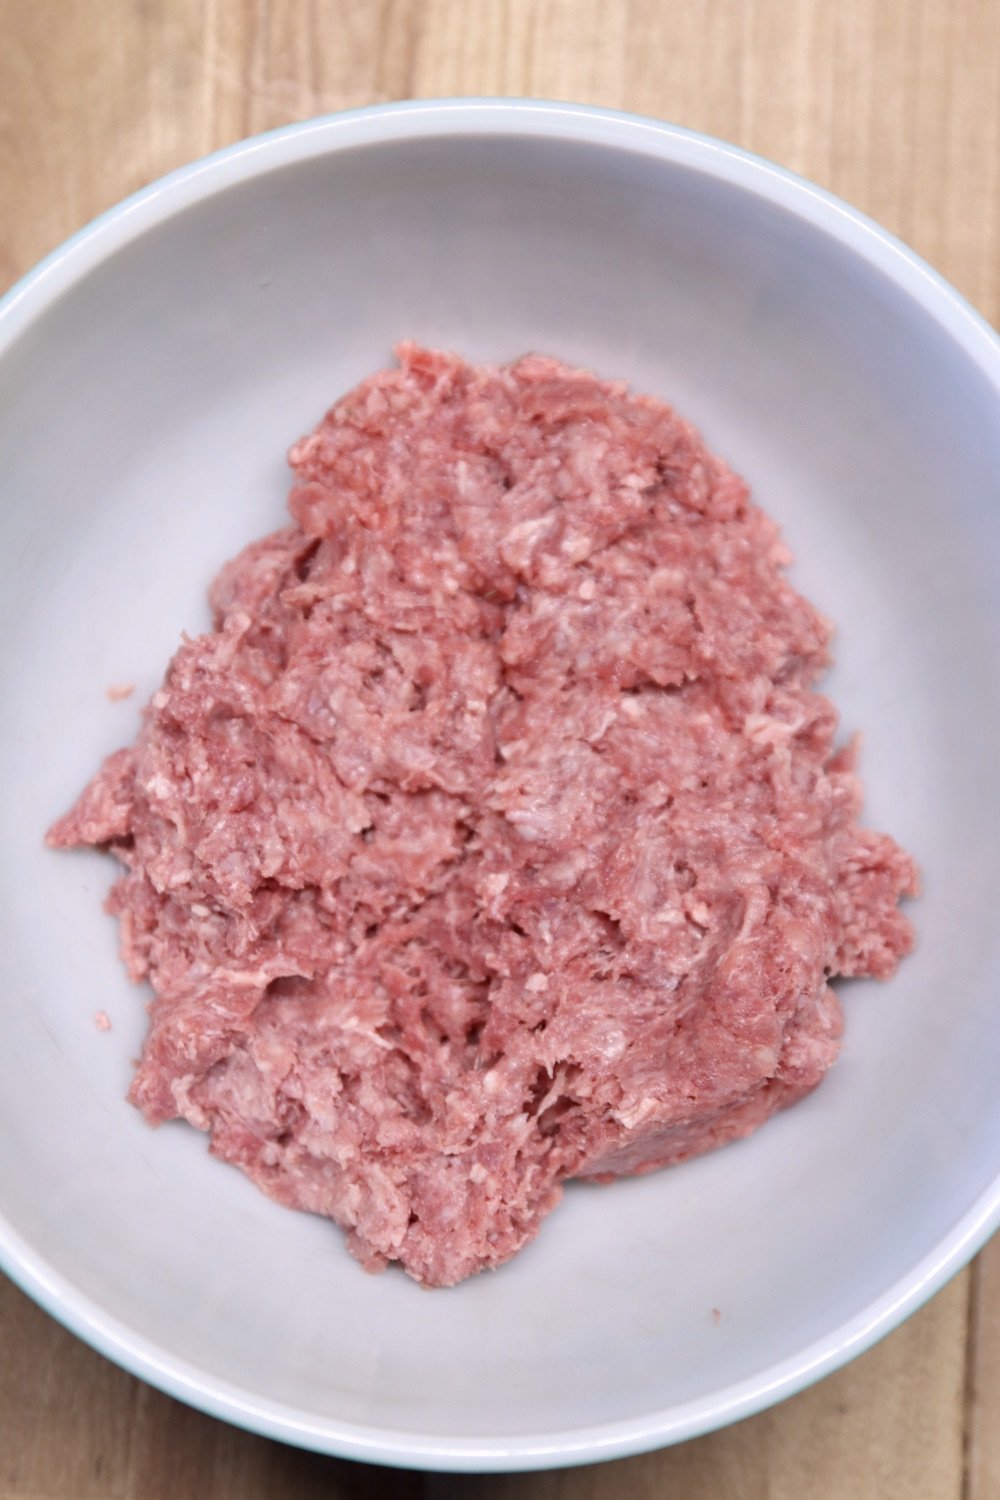 Ground beef in a bowl for making meatballs